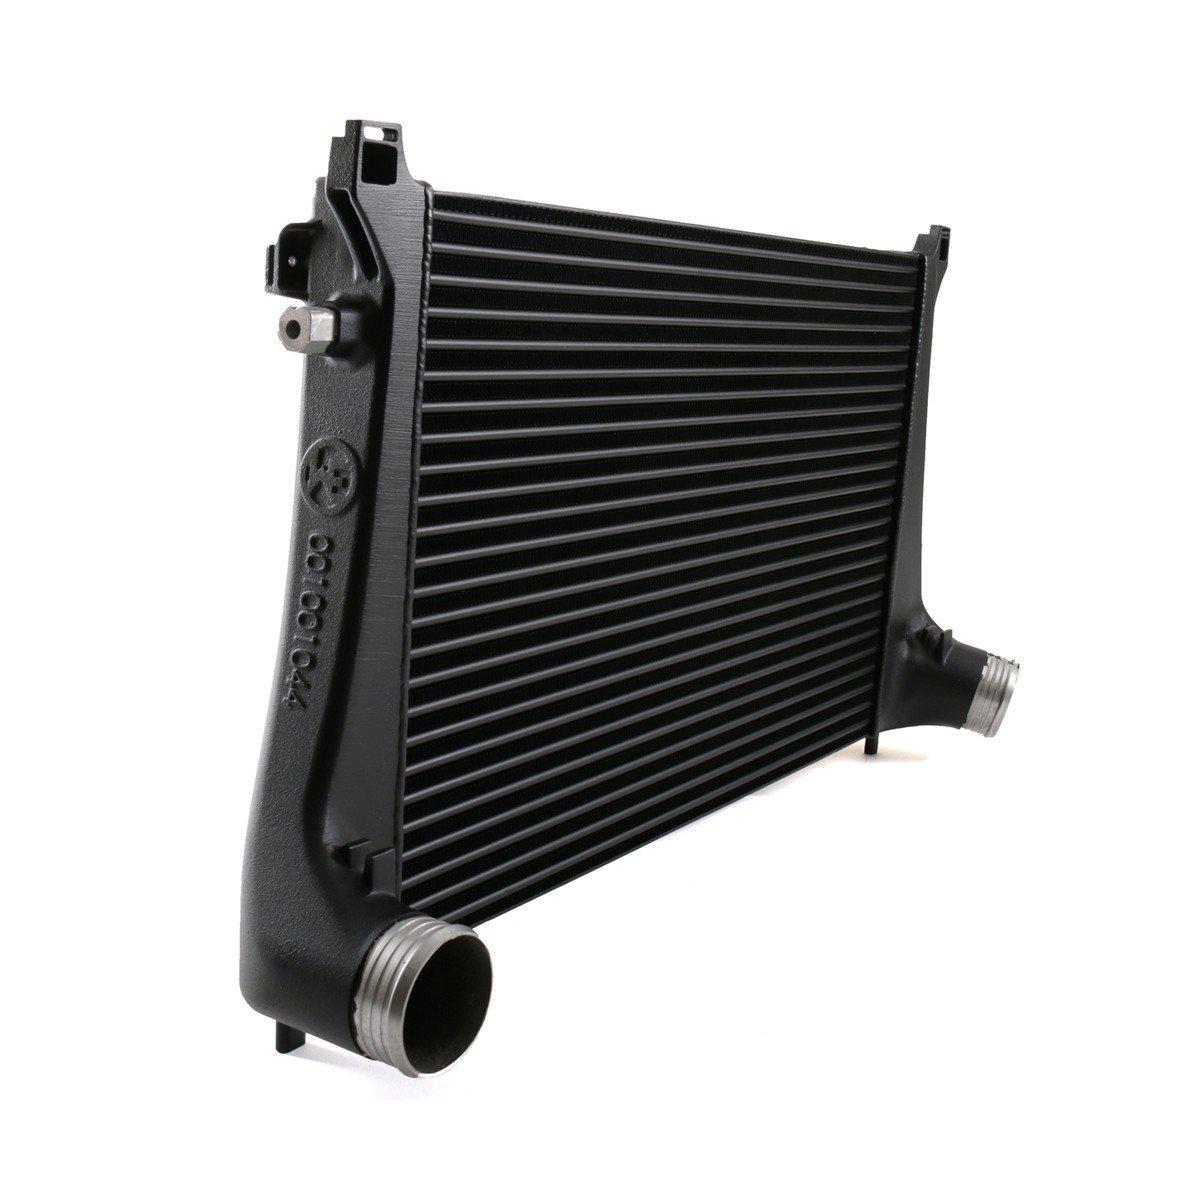 Wagner Tuning Competition Intercooler Kit For MKVII Volkswagen Golf/GTI/R &amp; 8V Audi A3/S3 1.8T/2.0T Ea888 Gen3-A Little Tuning Co